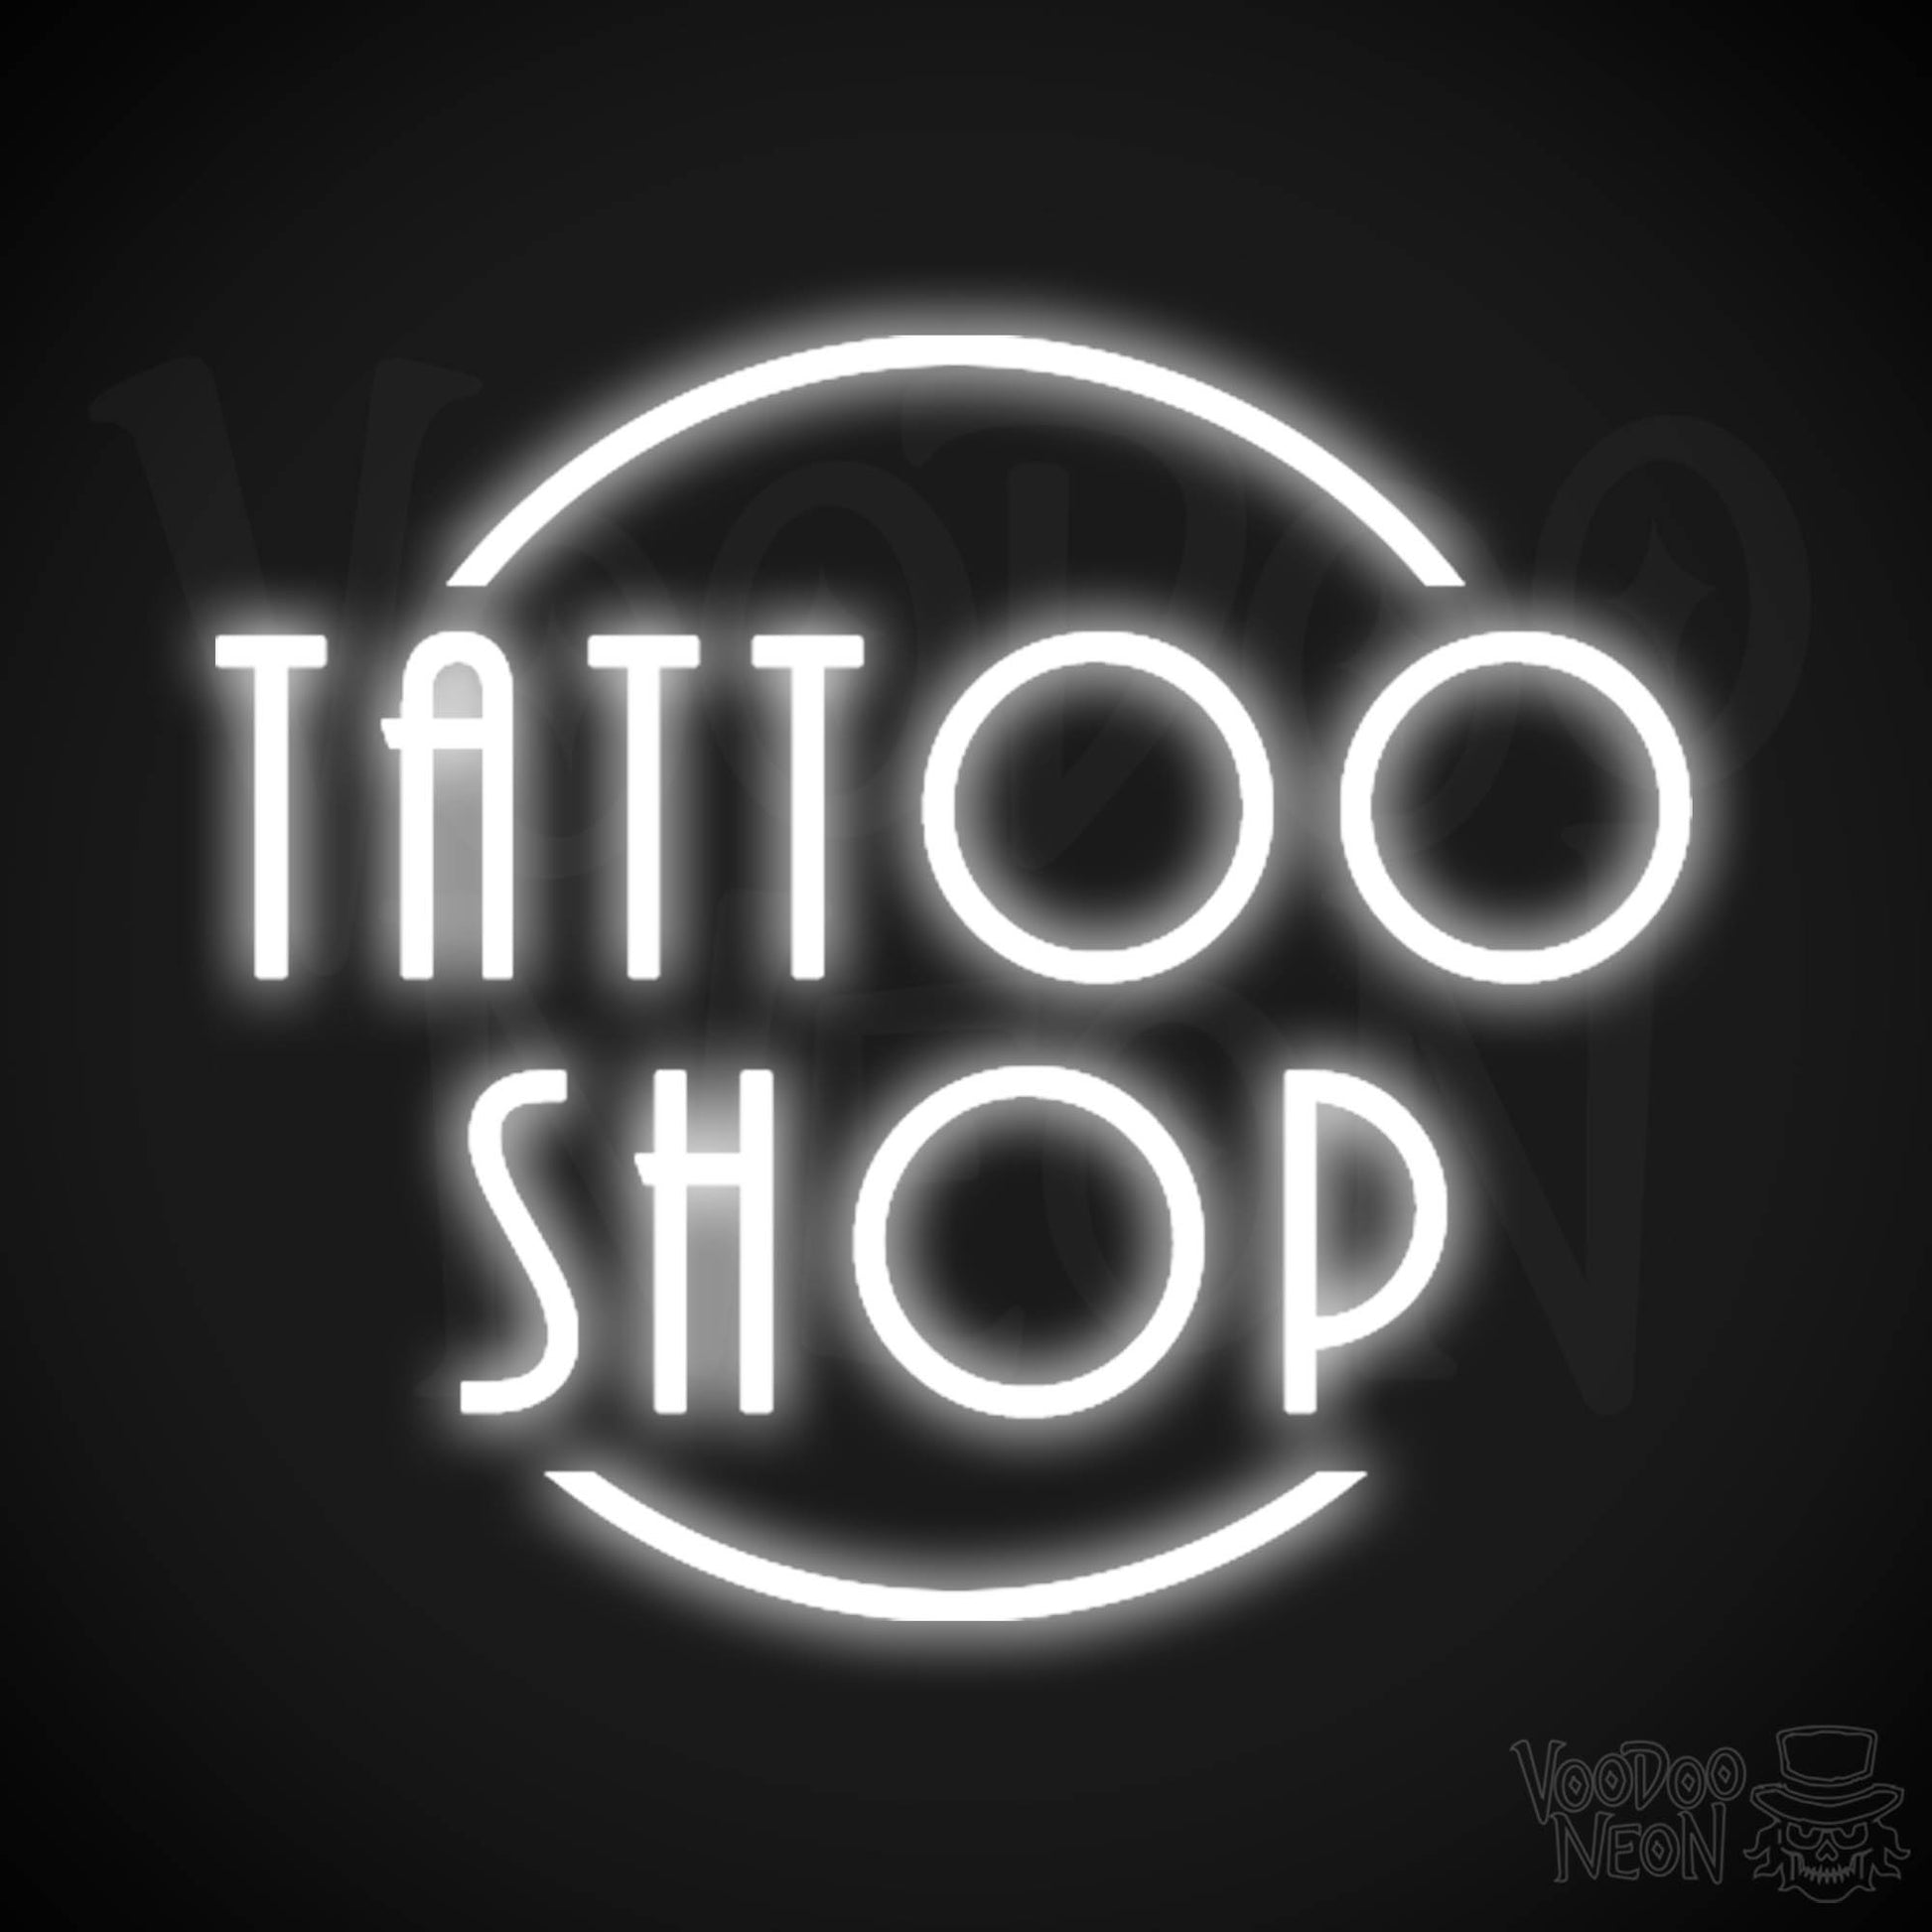 Tattoo Shop Neon Sign - Neon Tattoo Shop Sign - Tattoo Sign - Color White